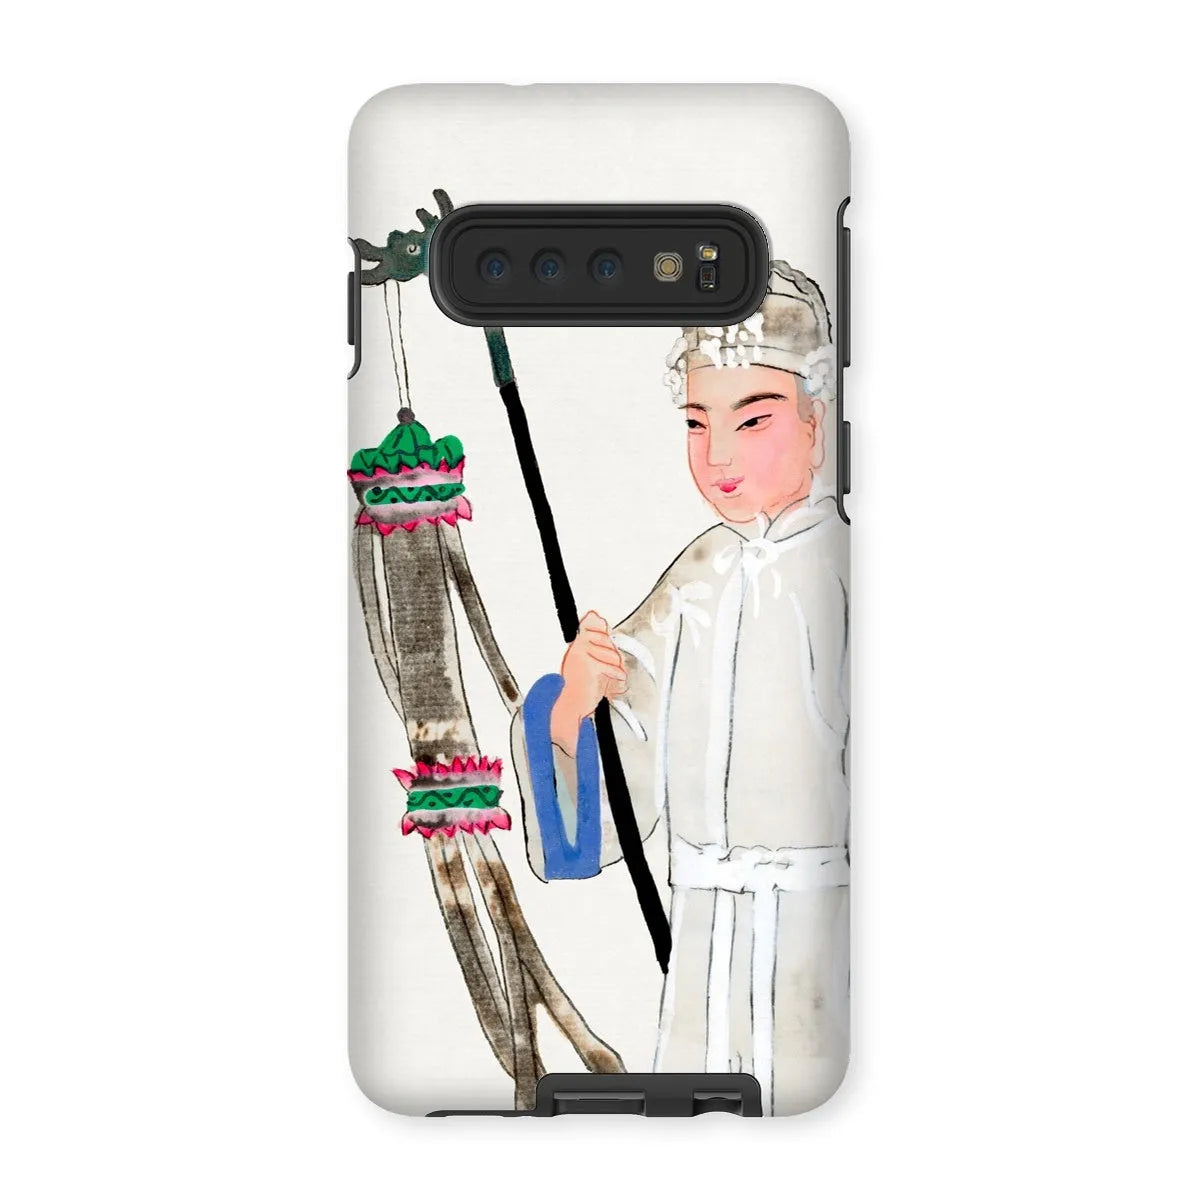 Man In Mourning - Chinese Historical Art Phone Case - Samsung Galaxy S10 / Matte - Mobile Phone Cases - Aesthetic Art